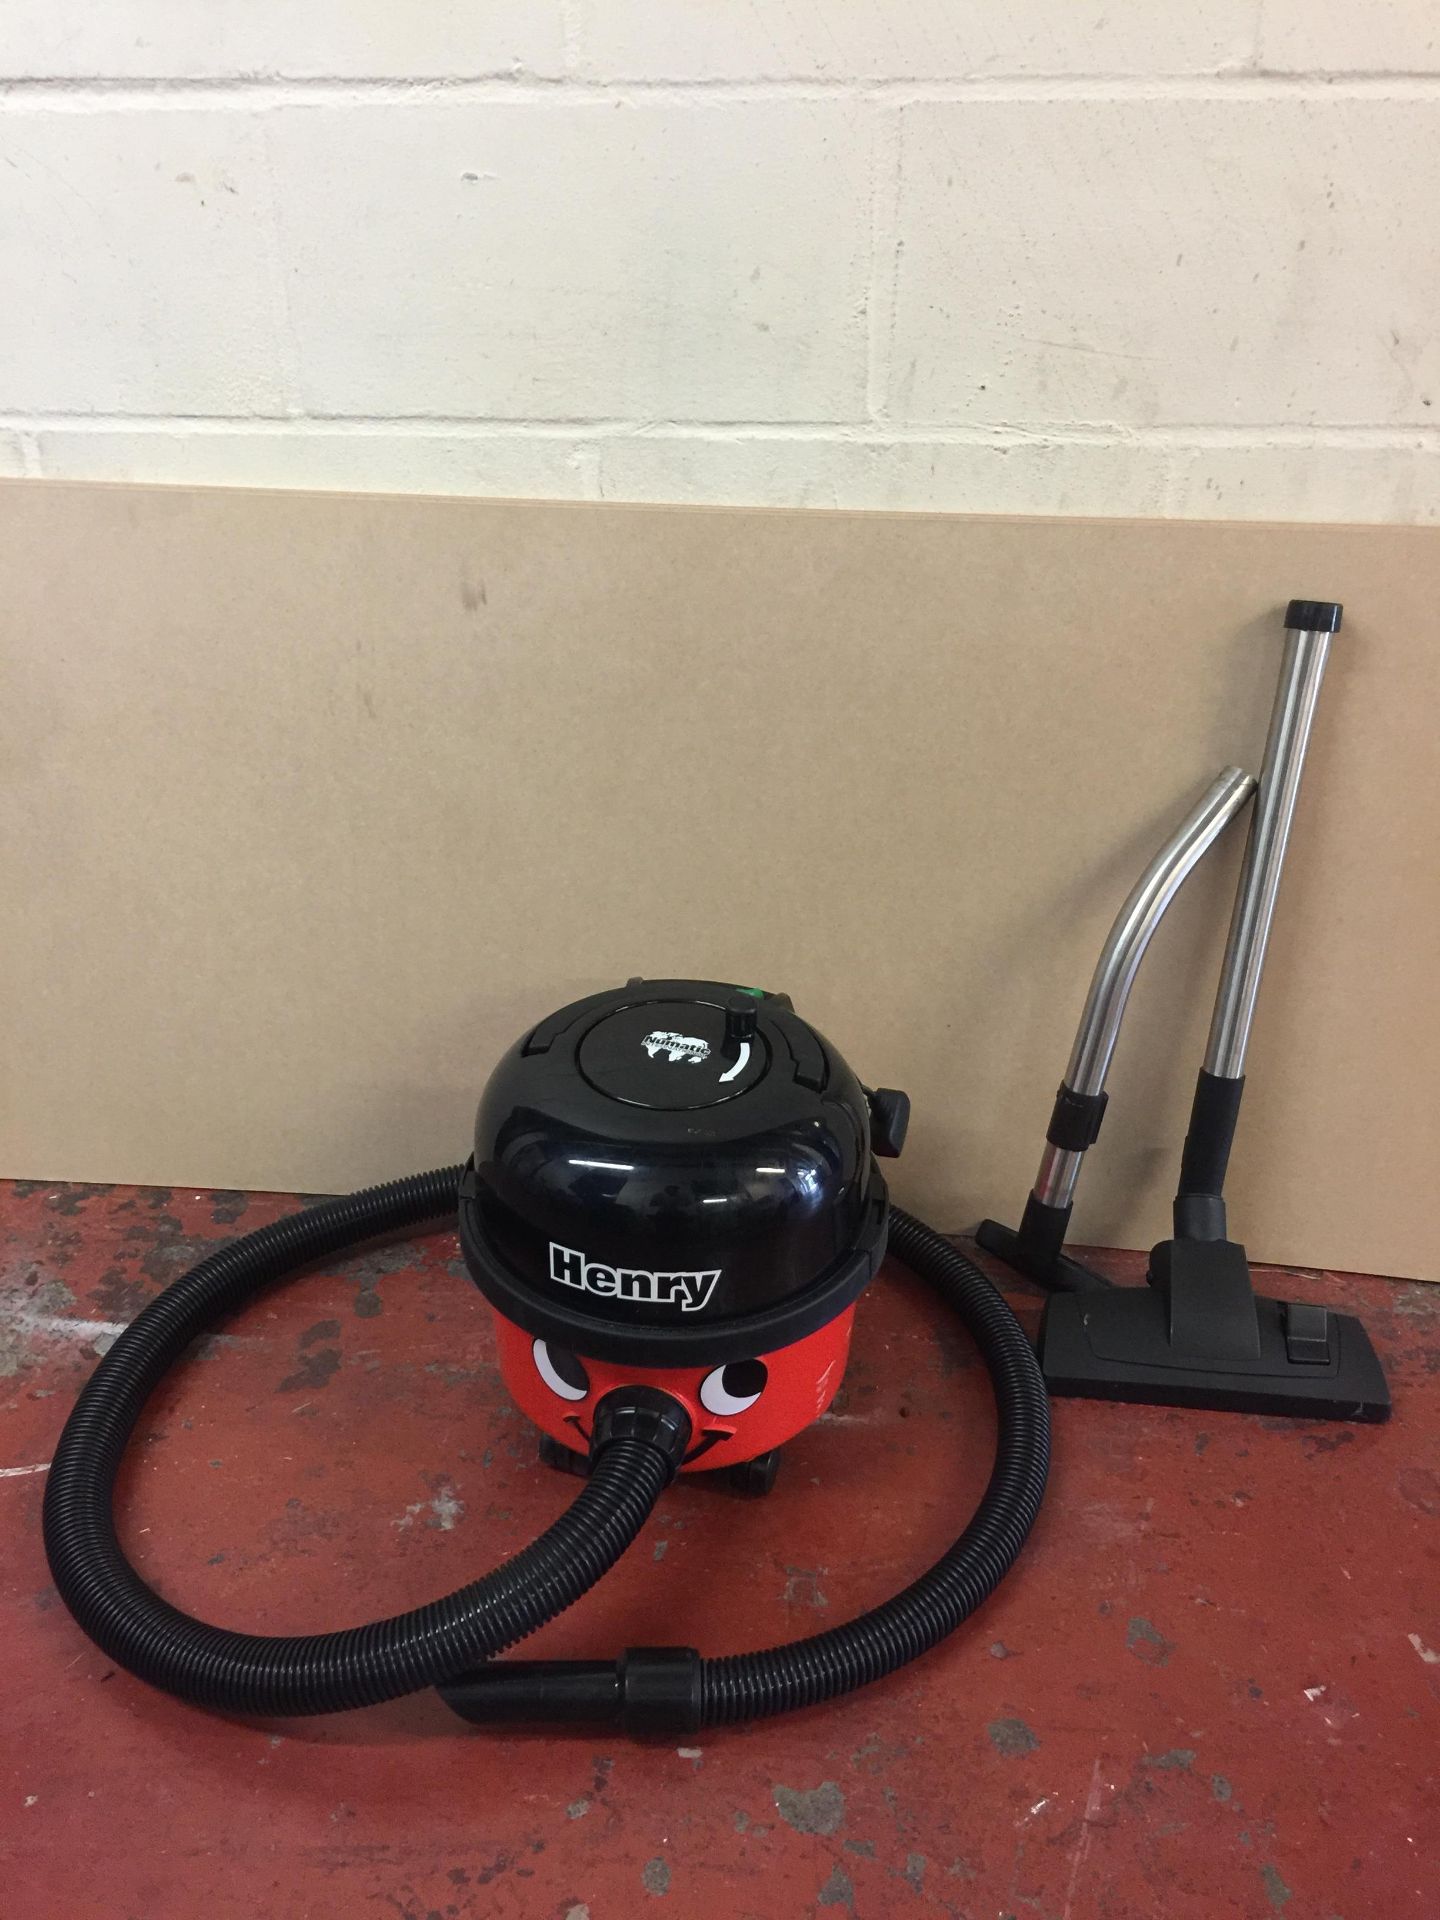 Henry HVR 160-11 Bagged Cylinder Vacuum (Powers on but no suction)